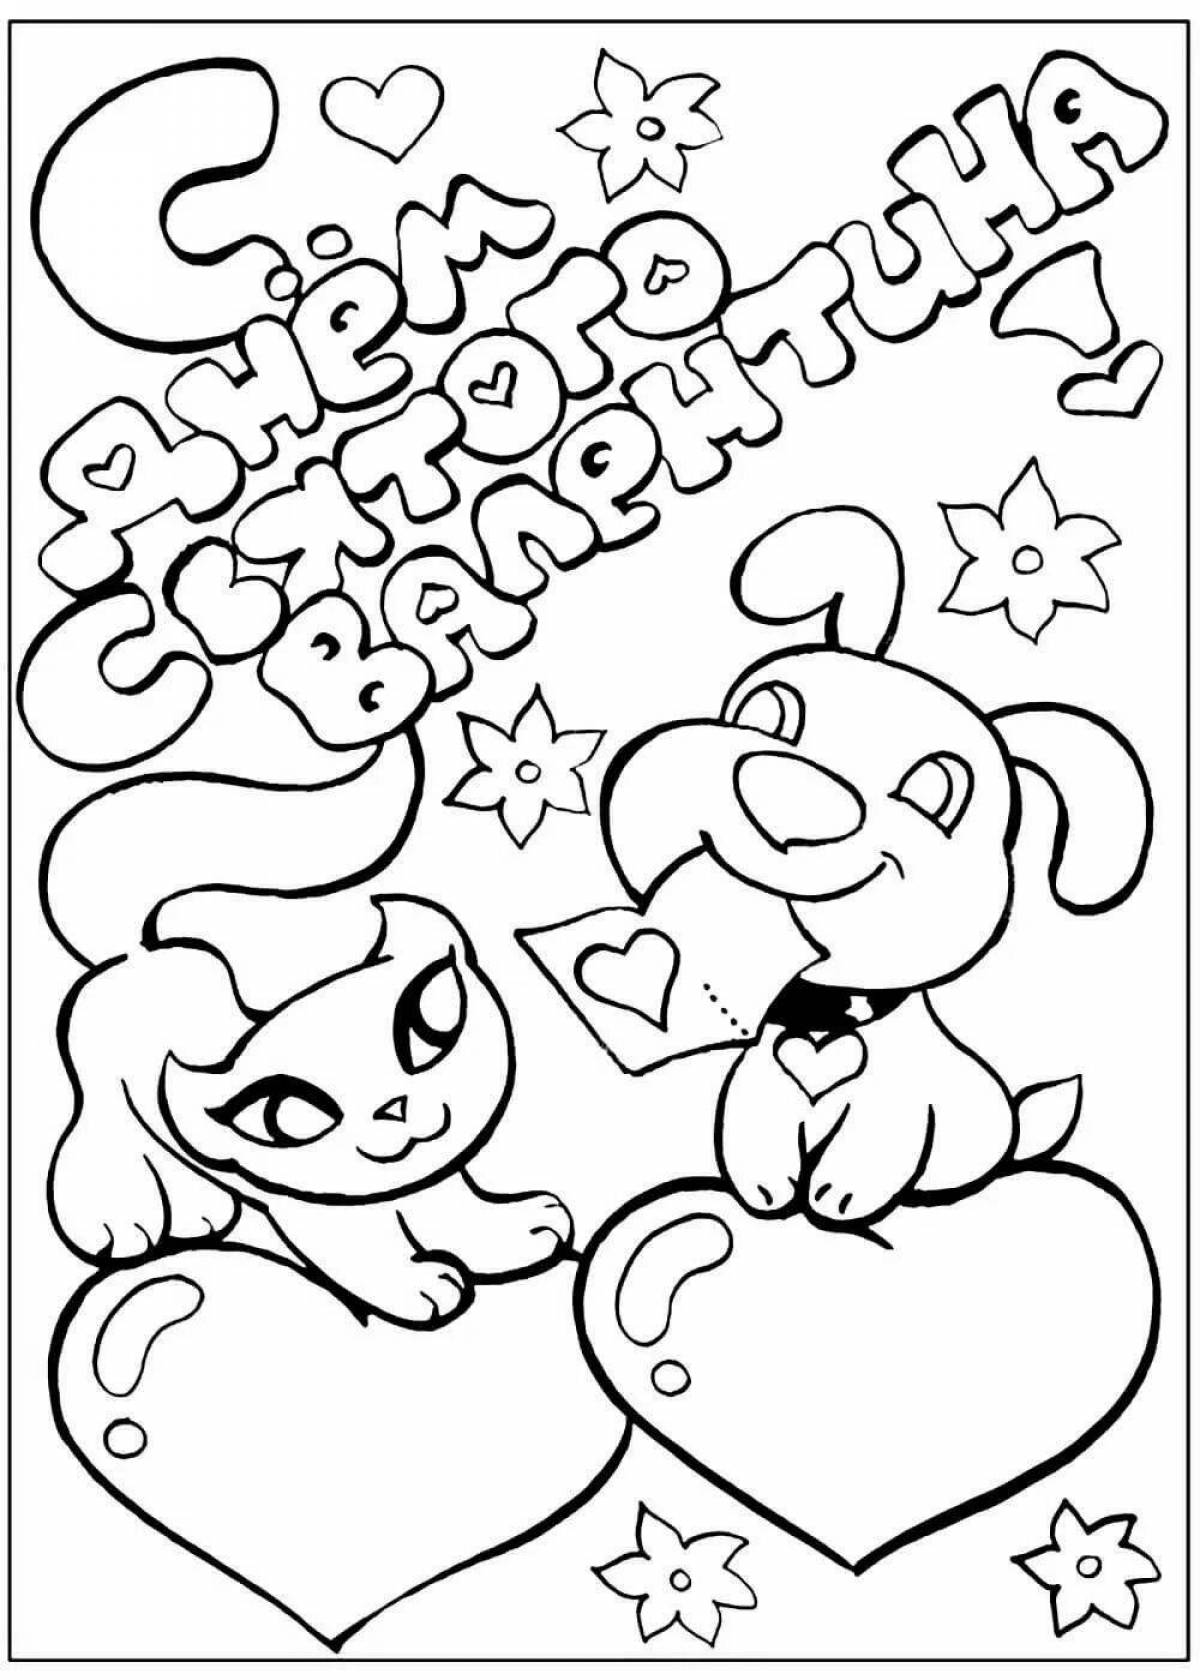 Funny valentine's day coloring book